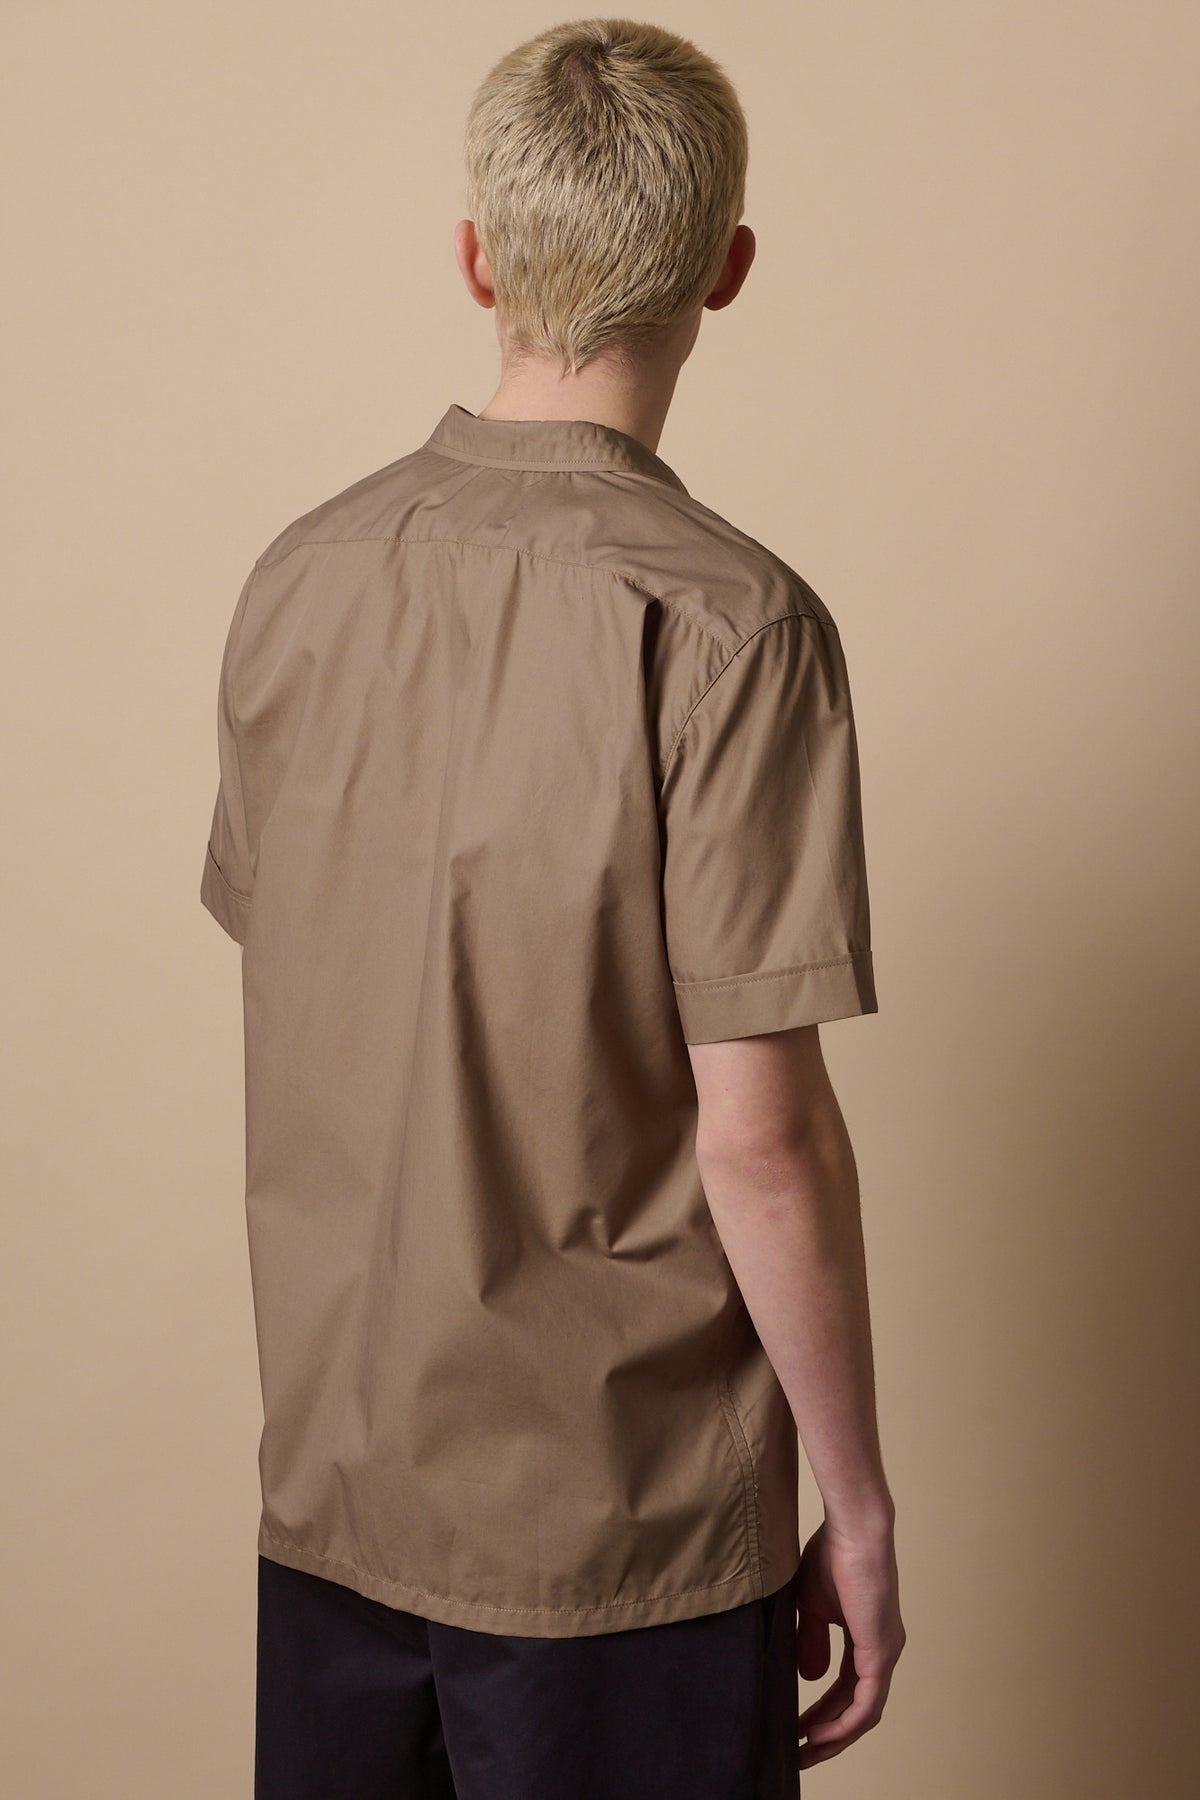 
            Thigh up image of the back of male with short blond hair wearing Tom short sleeve military shirt in khaki 